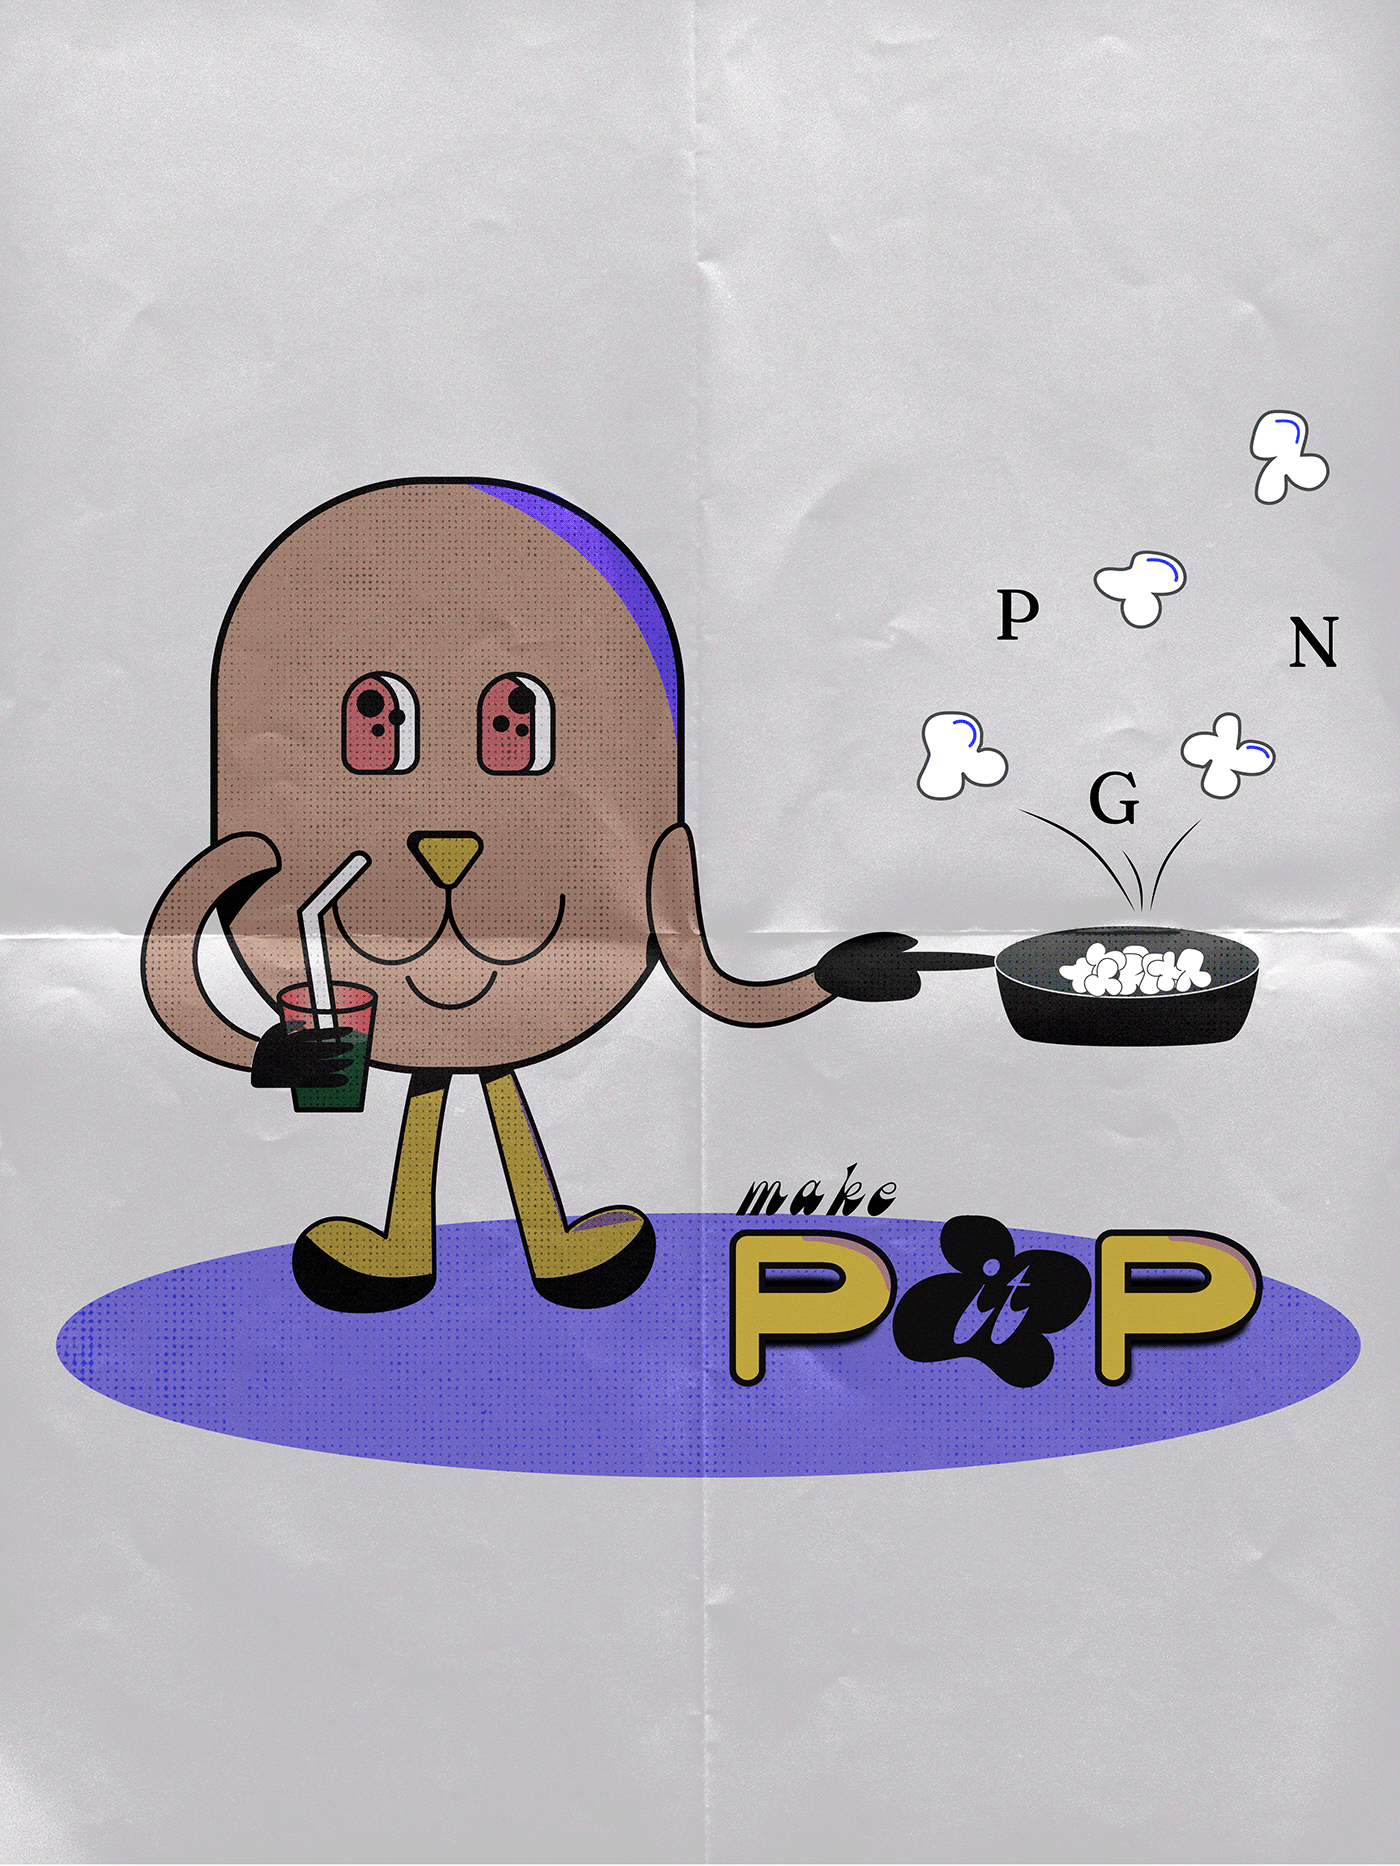 pop art, halftone poster showing a round shaped character who makes popcorn and logos pop